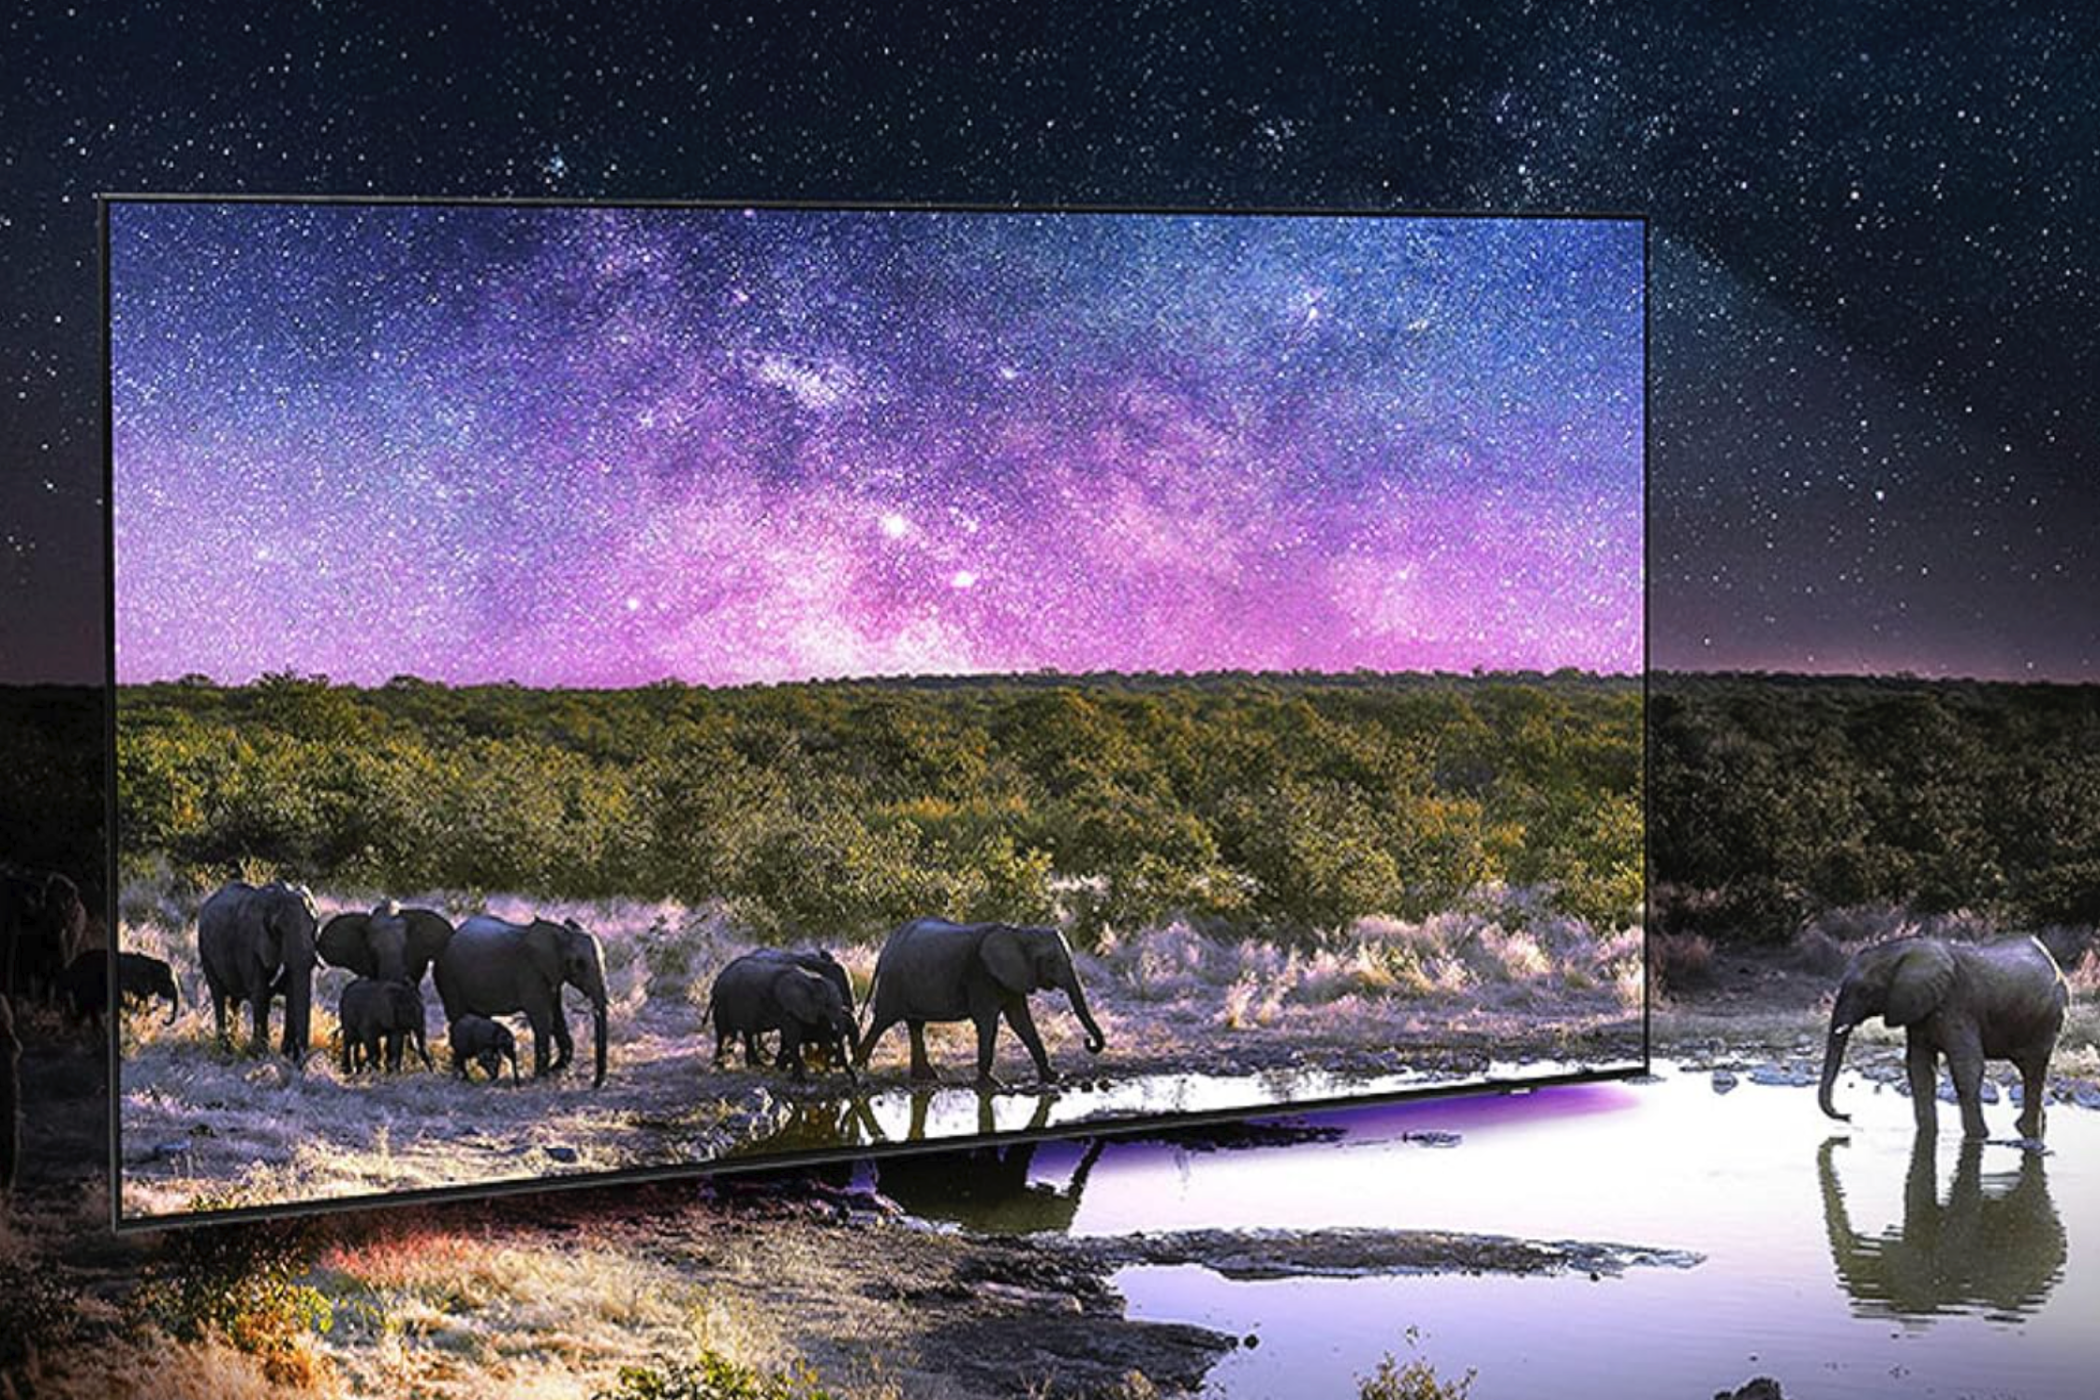 An image depicting elephants walking out of a Samsung Neo QLED 4K QN90C TV to demonstrate the lifelike image quality.